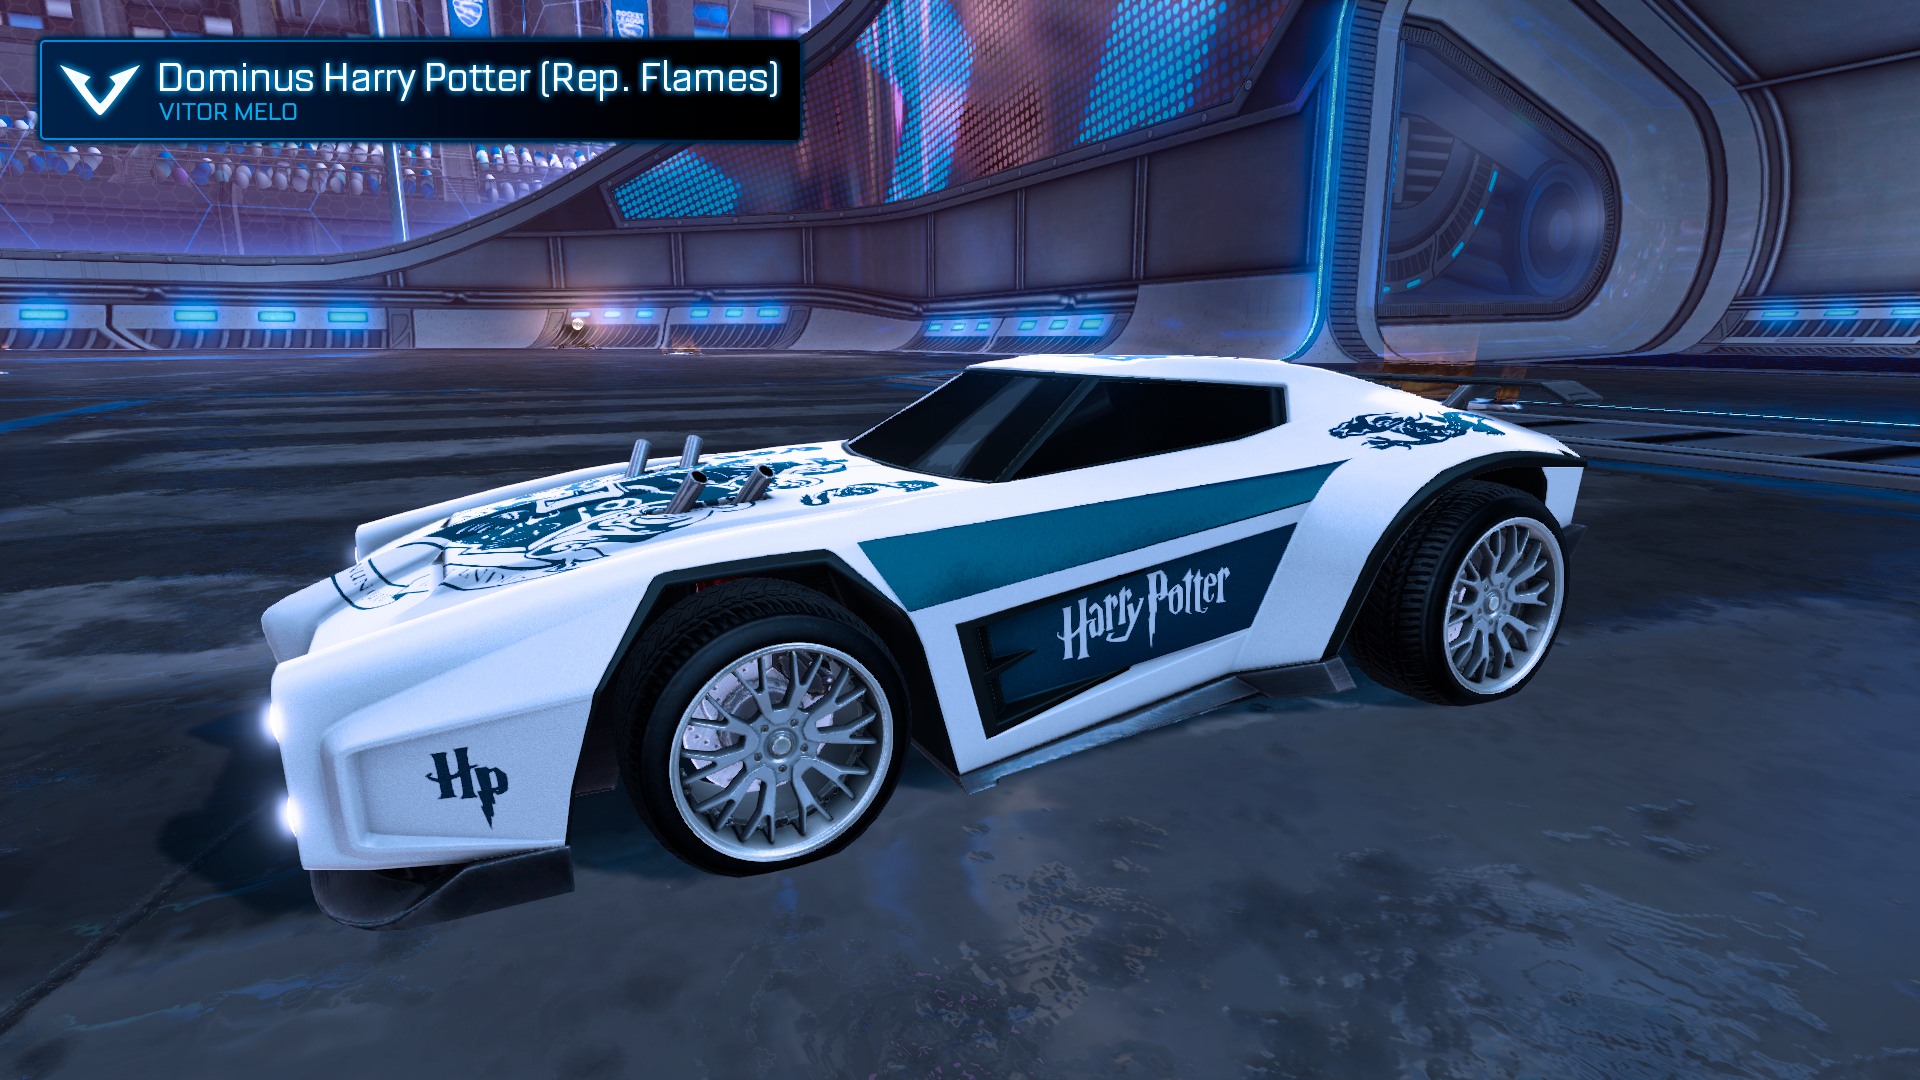 Dominus Harry Potter (Decal Default and Inverse Colors – Rep. Flames)